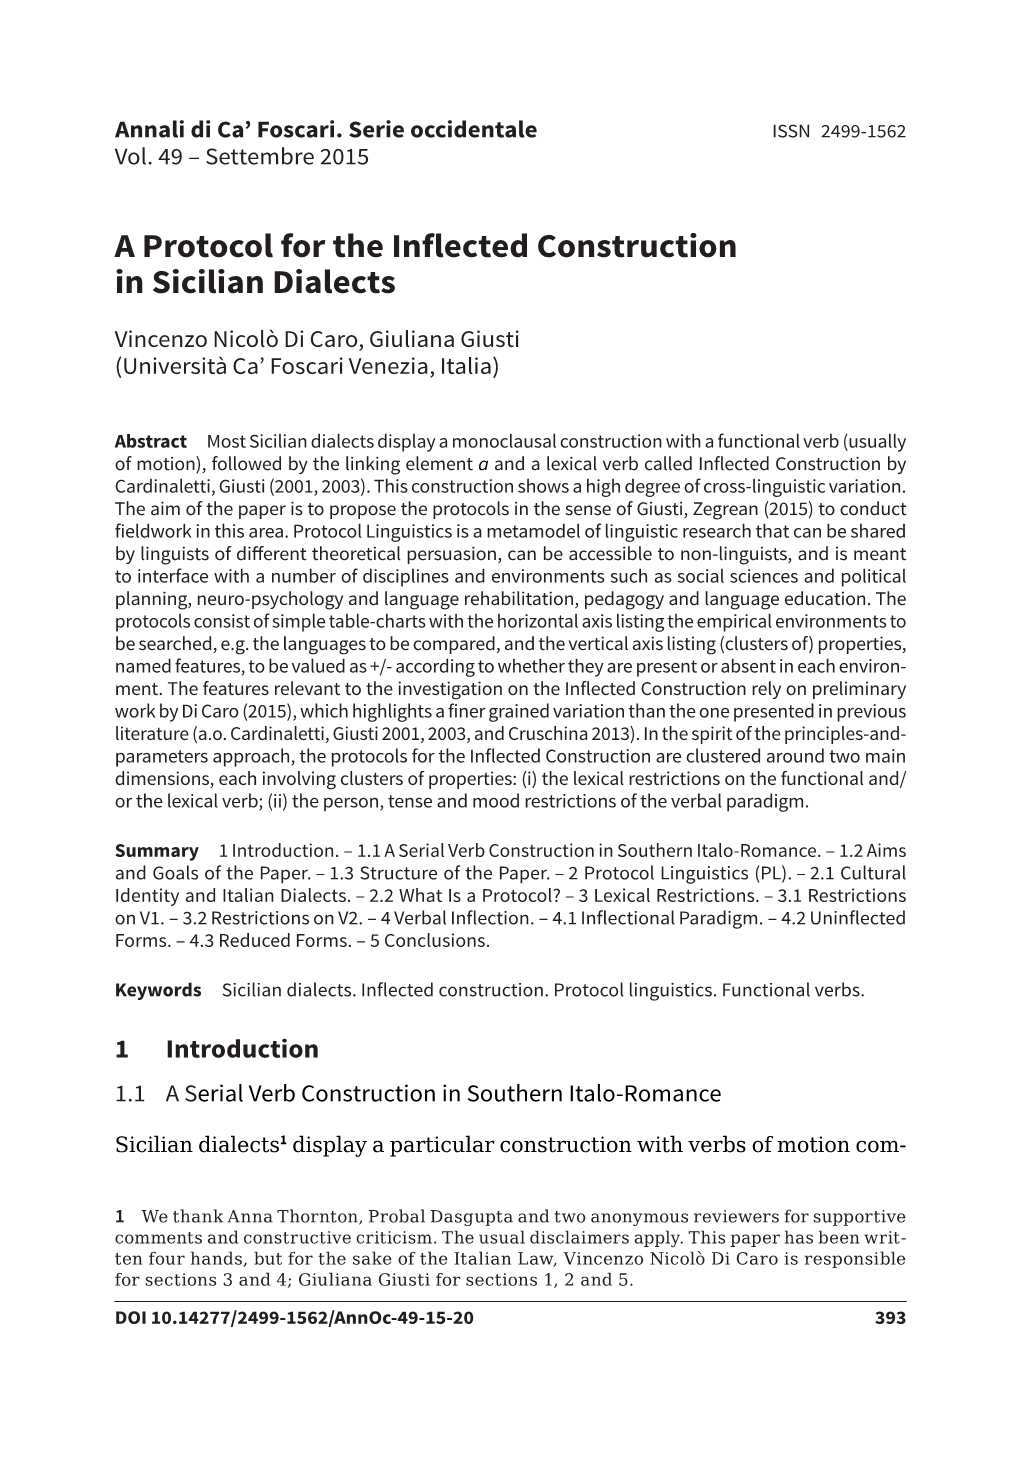 A Protocol for the Inflected Construction in Sicilian Dialects